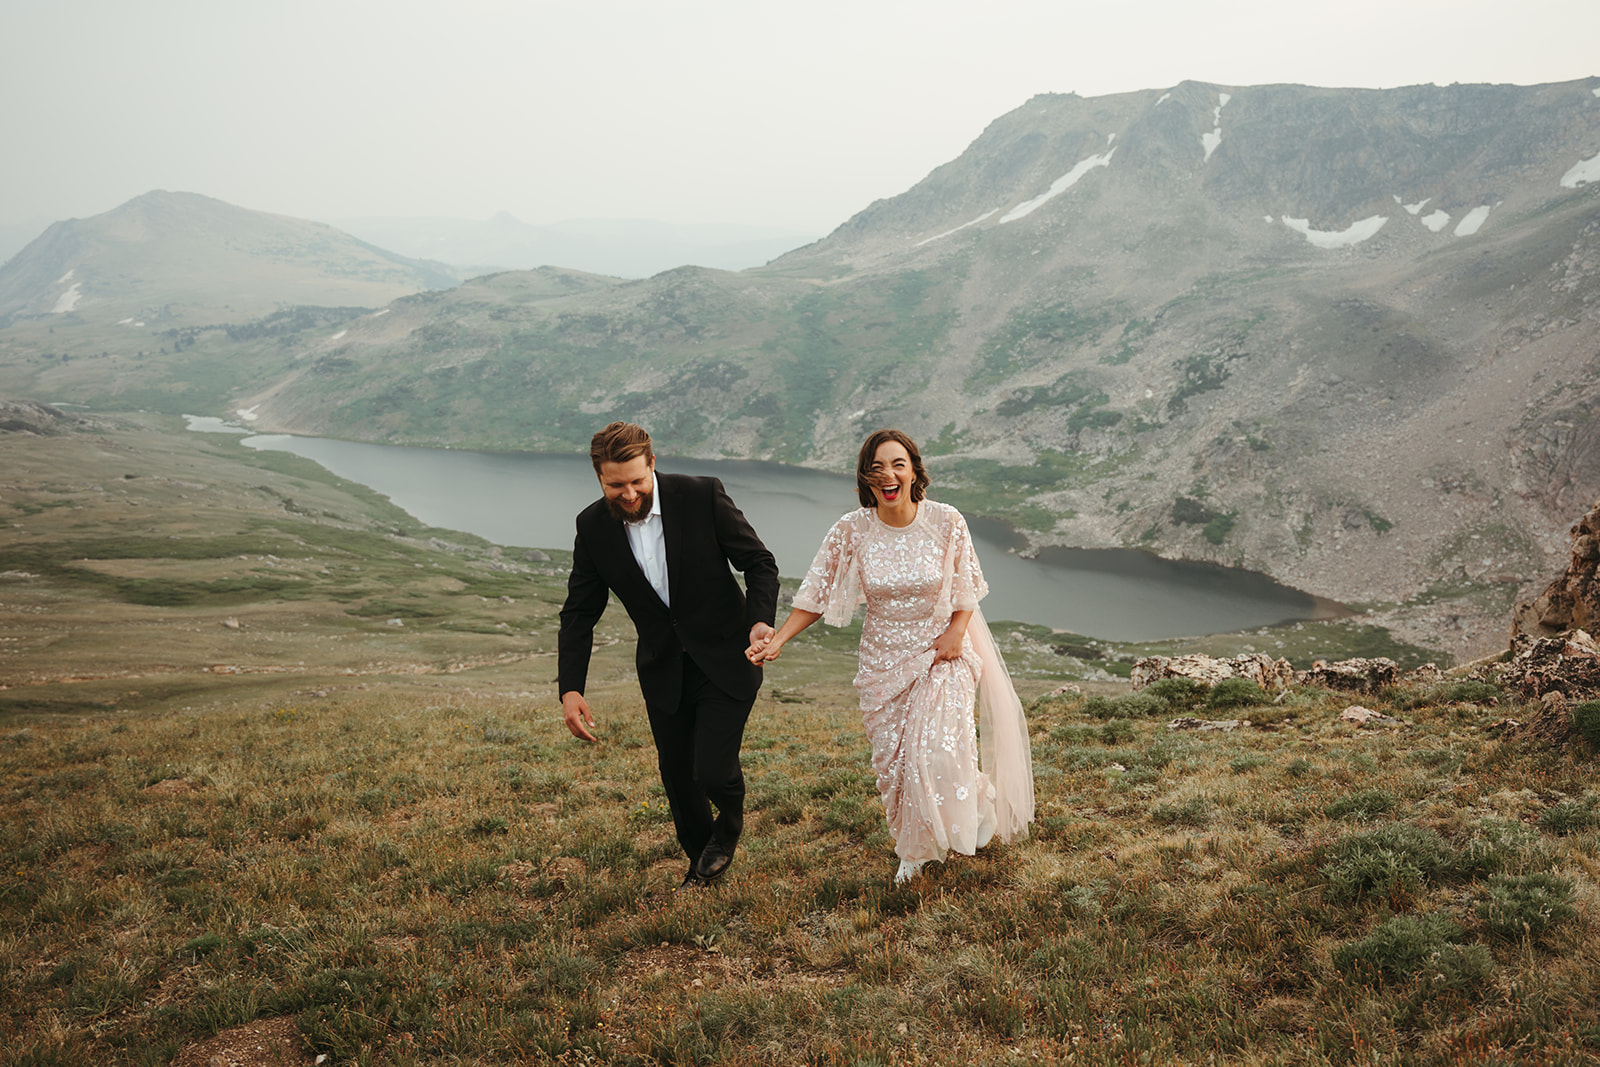 Niky and Vlad holding hands during their Montana elopement in the Beartooth Mountains.